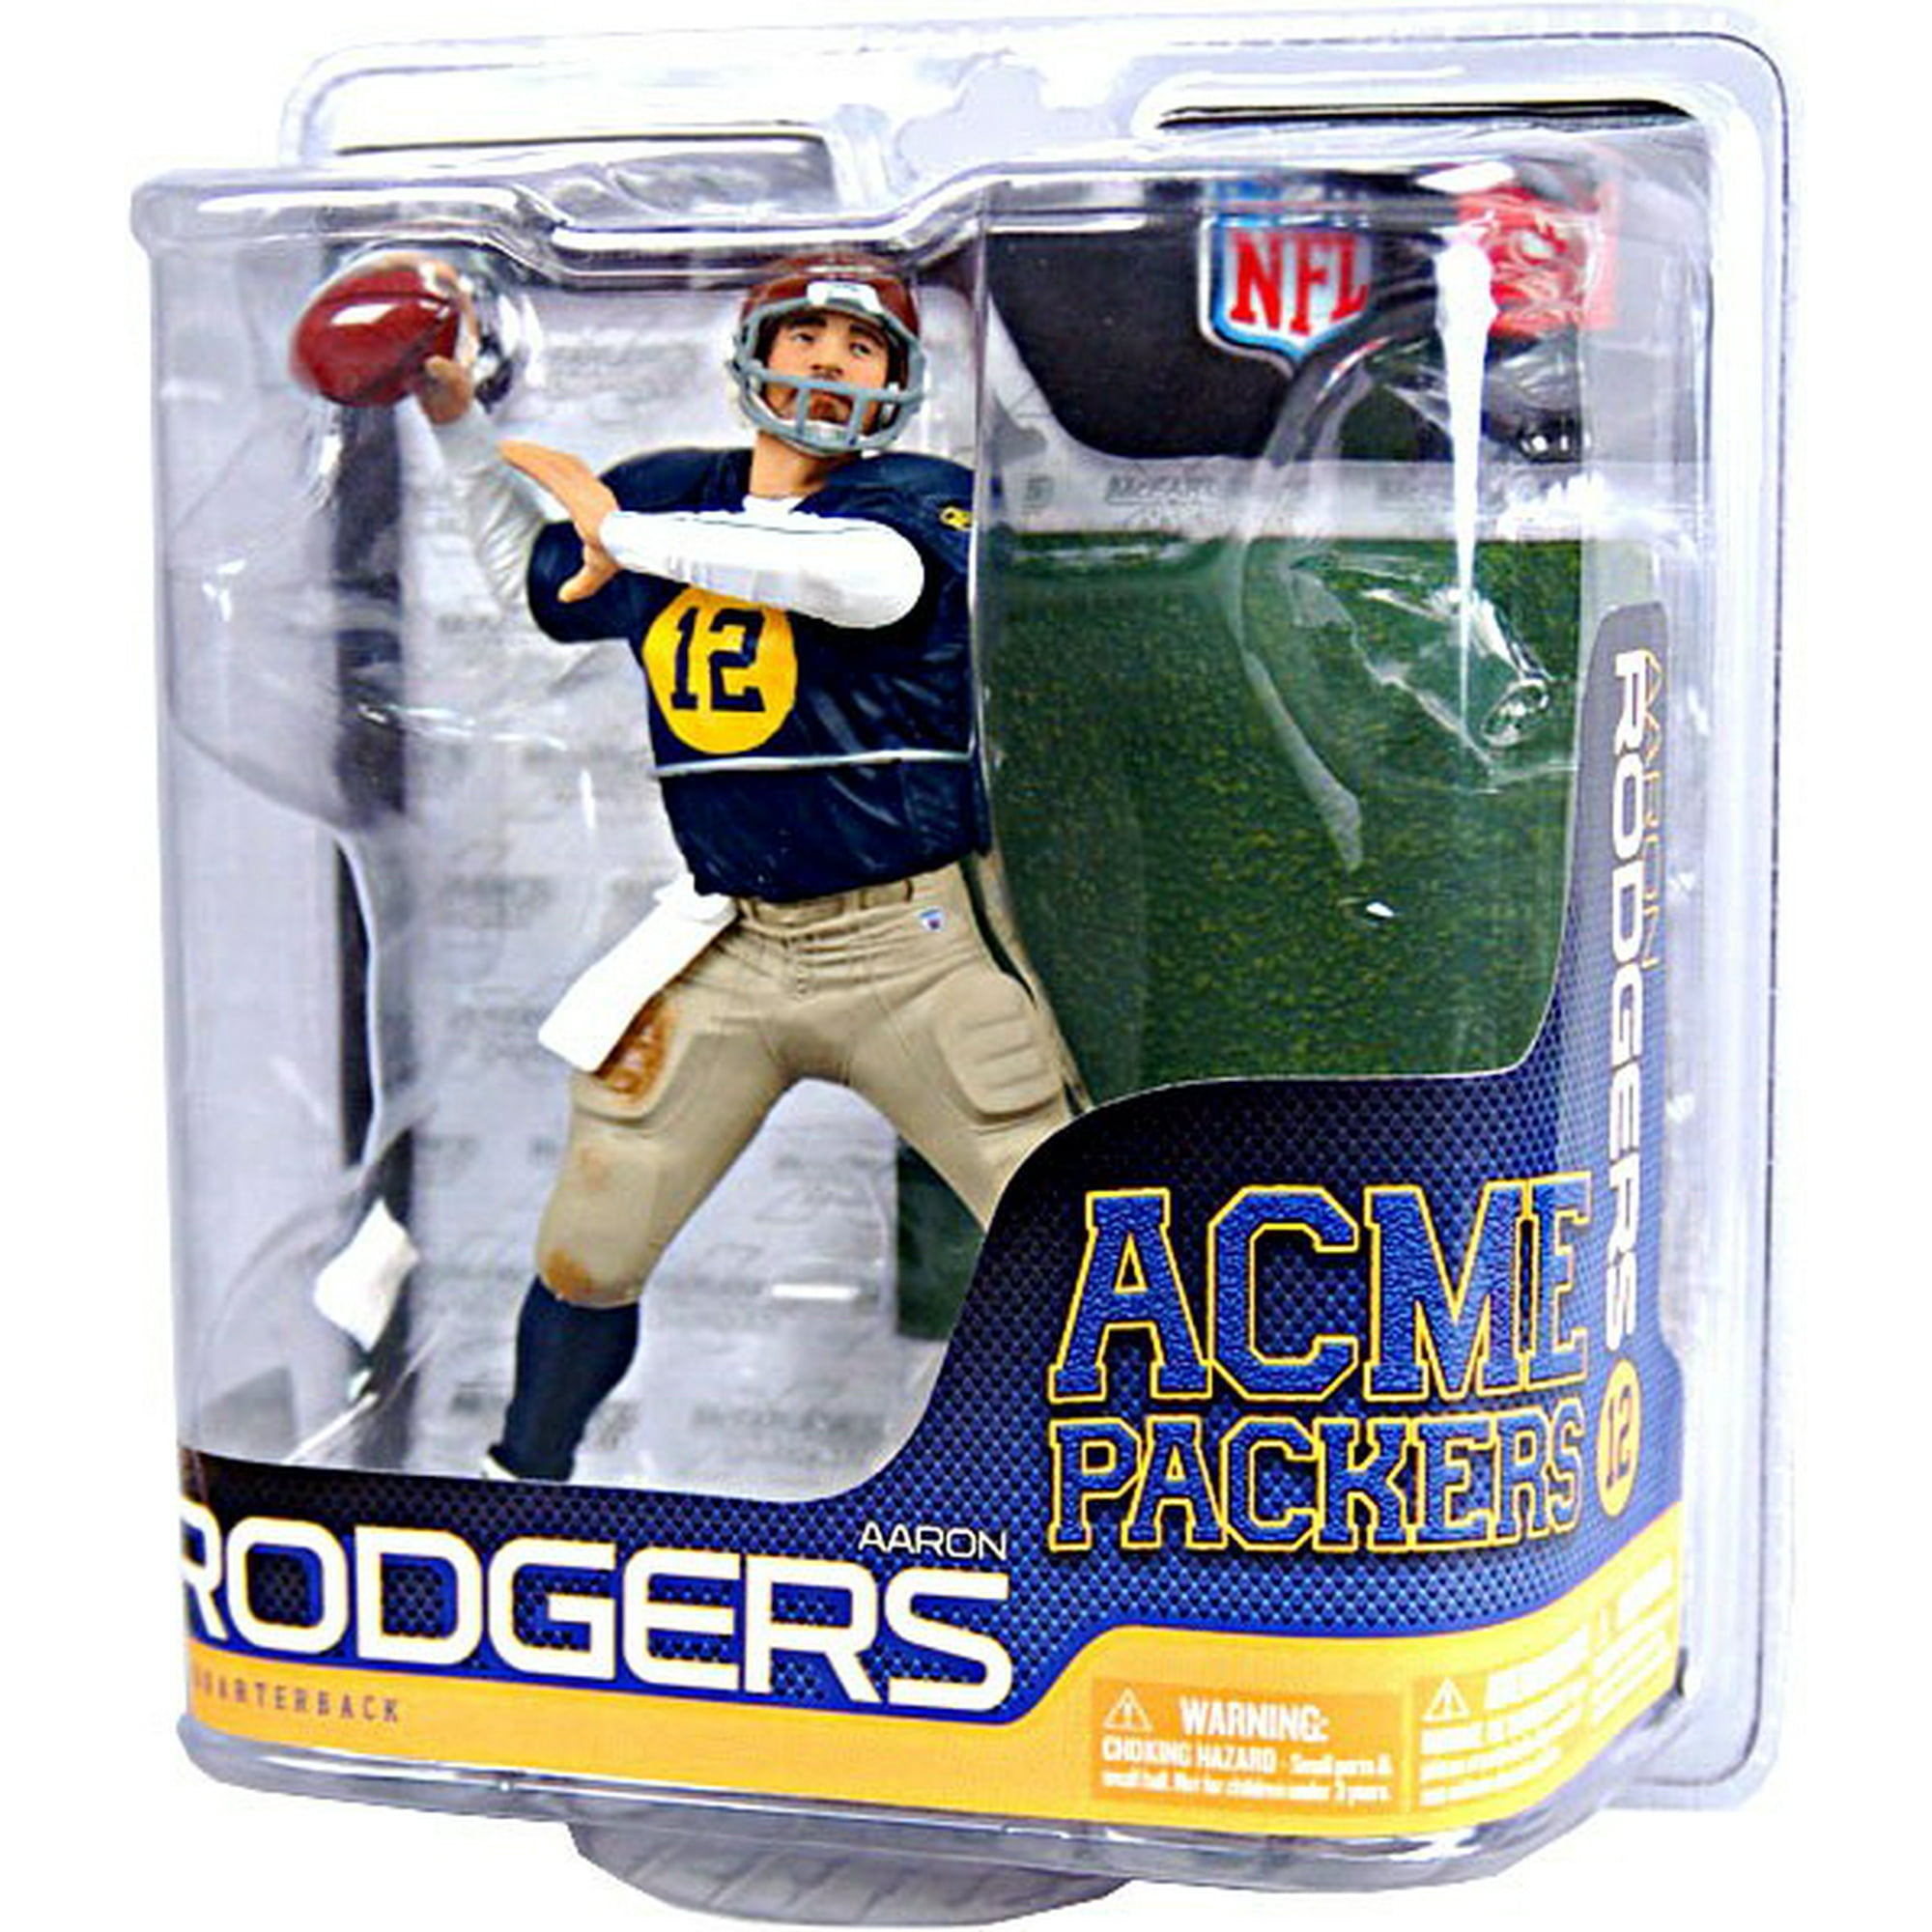 Aaron Rodgers Action Figure Retro Old Scool Uniform NFL Acme Packers 